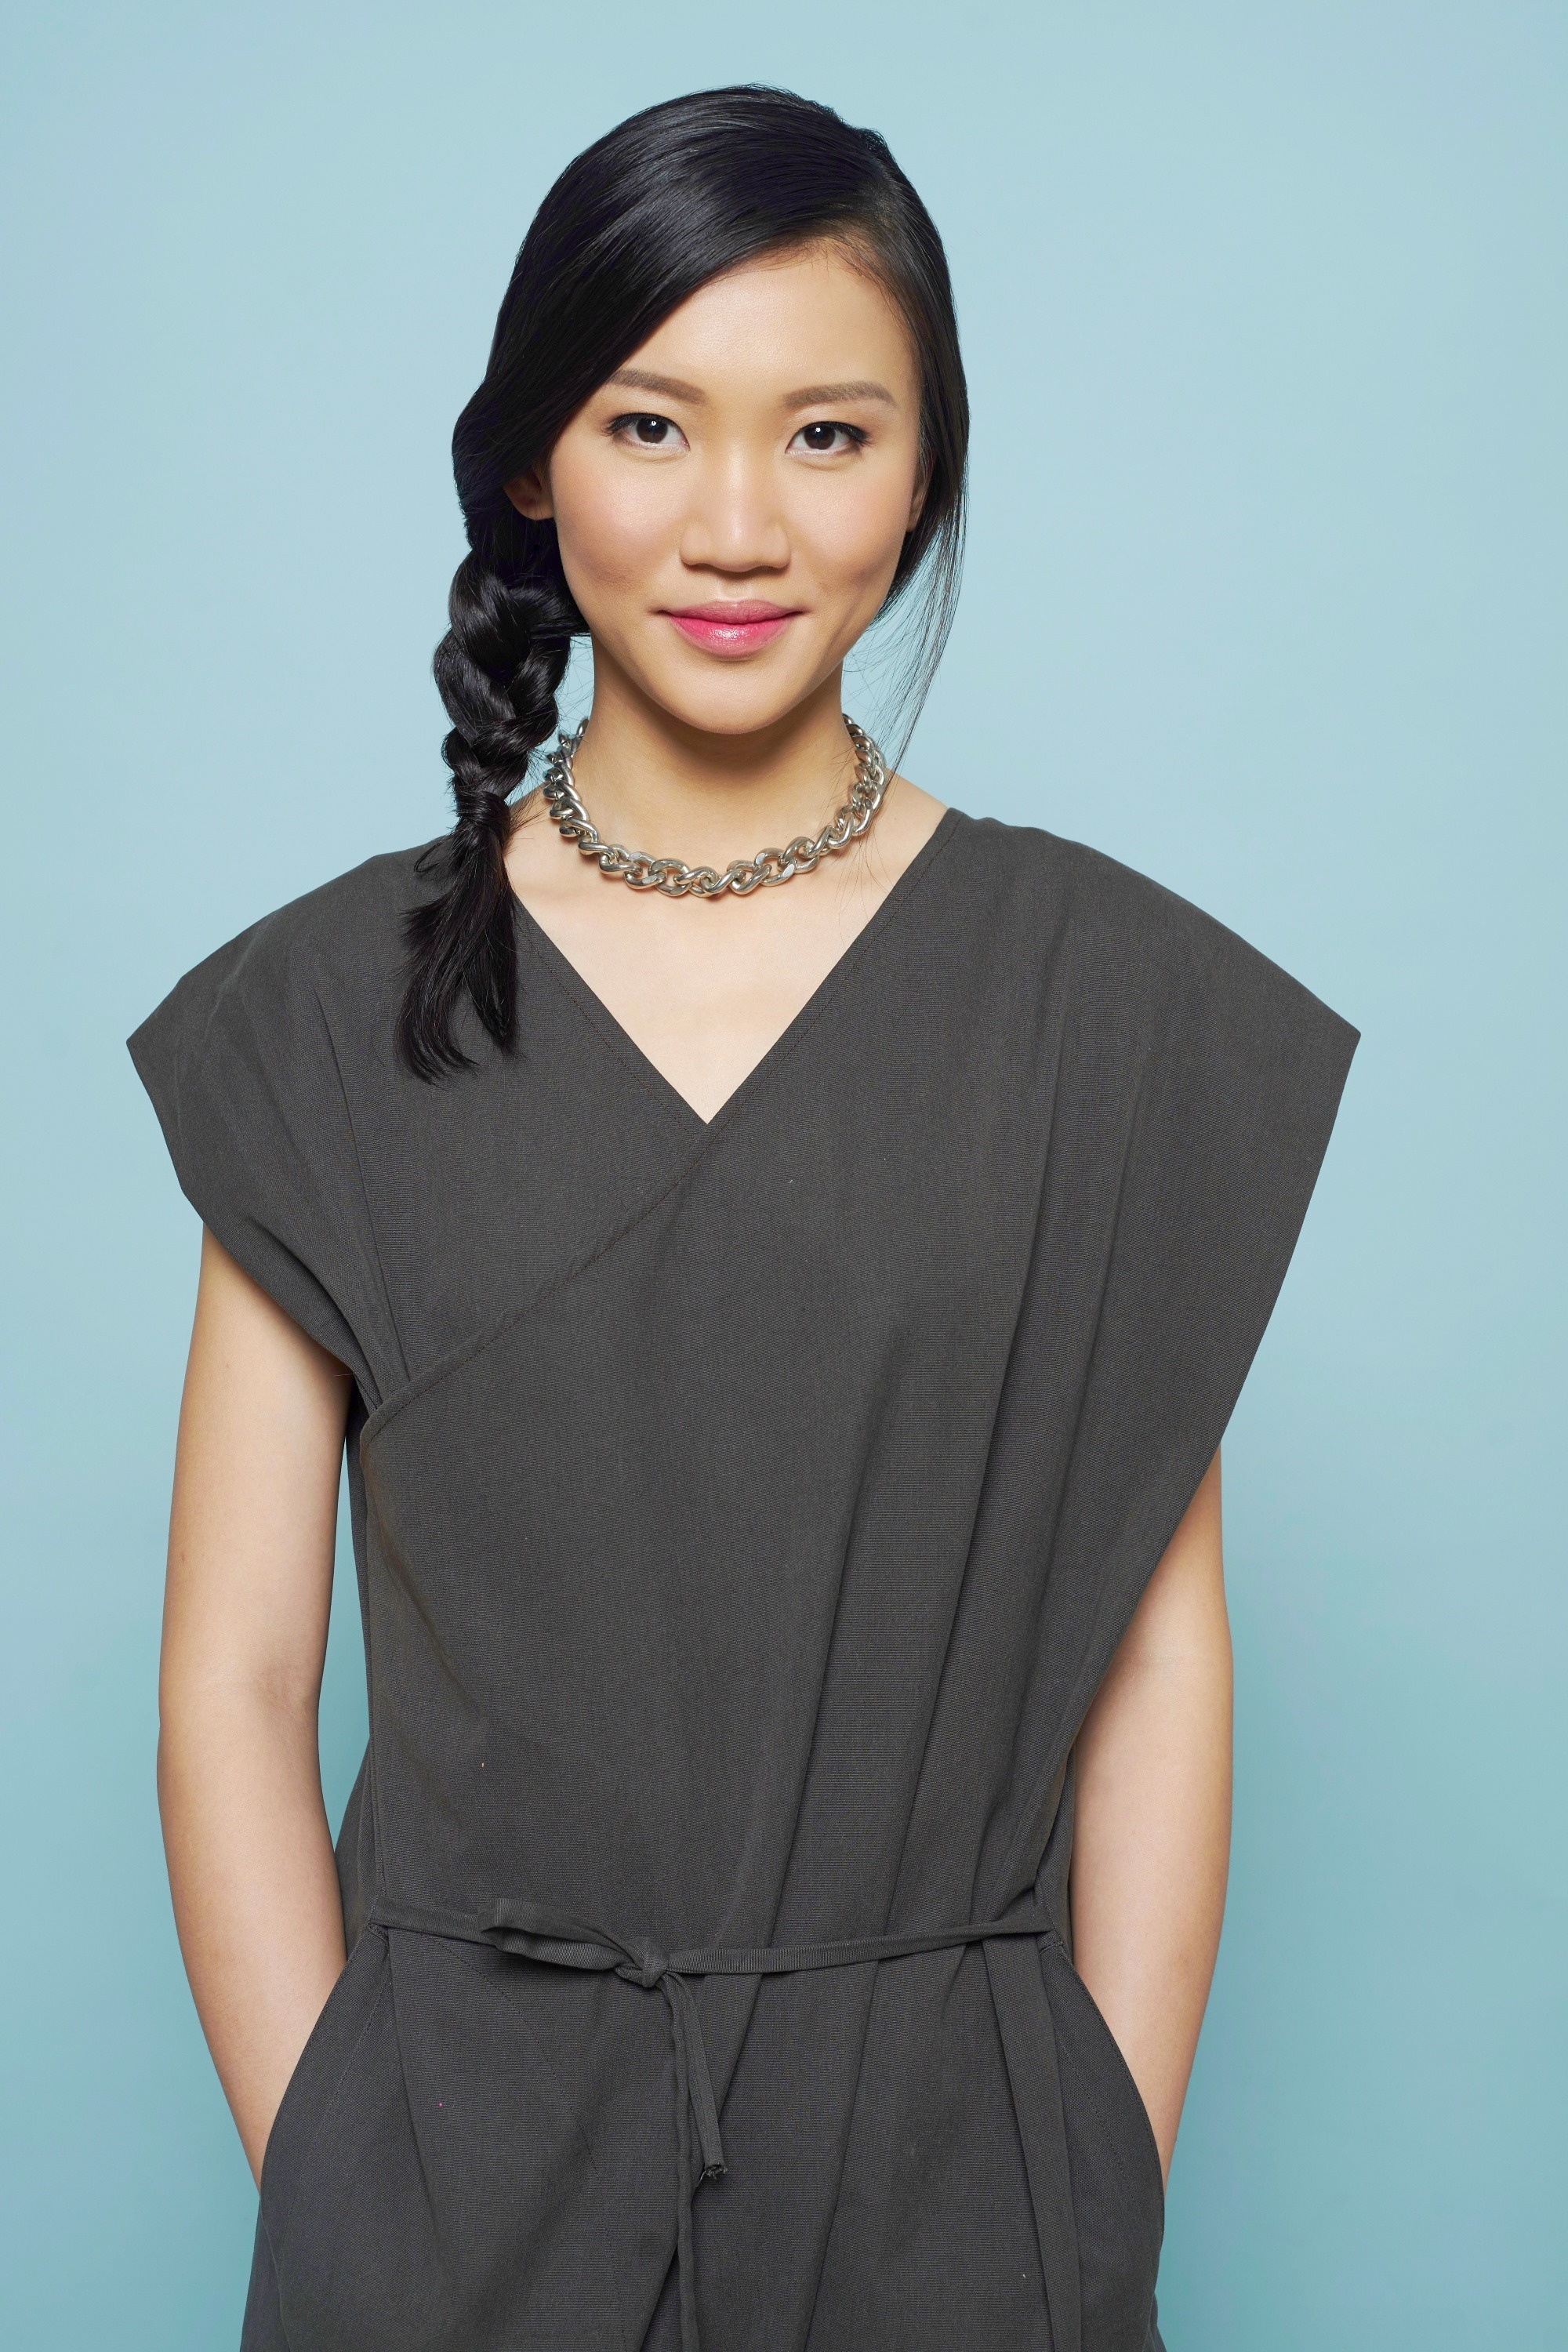 Asian woman with a side braid wearing a romper